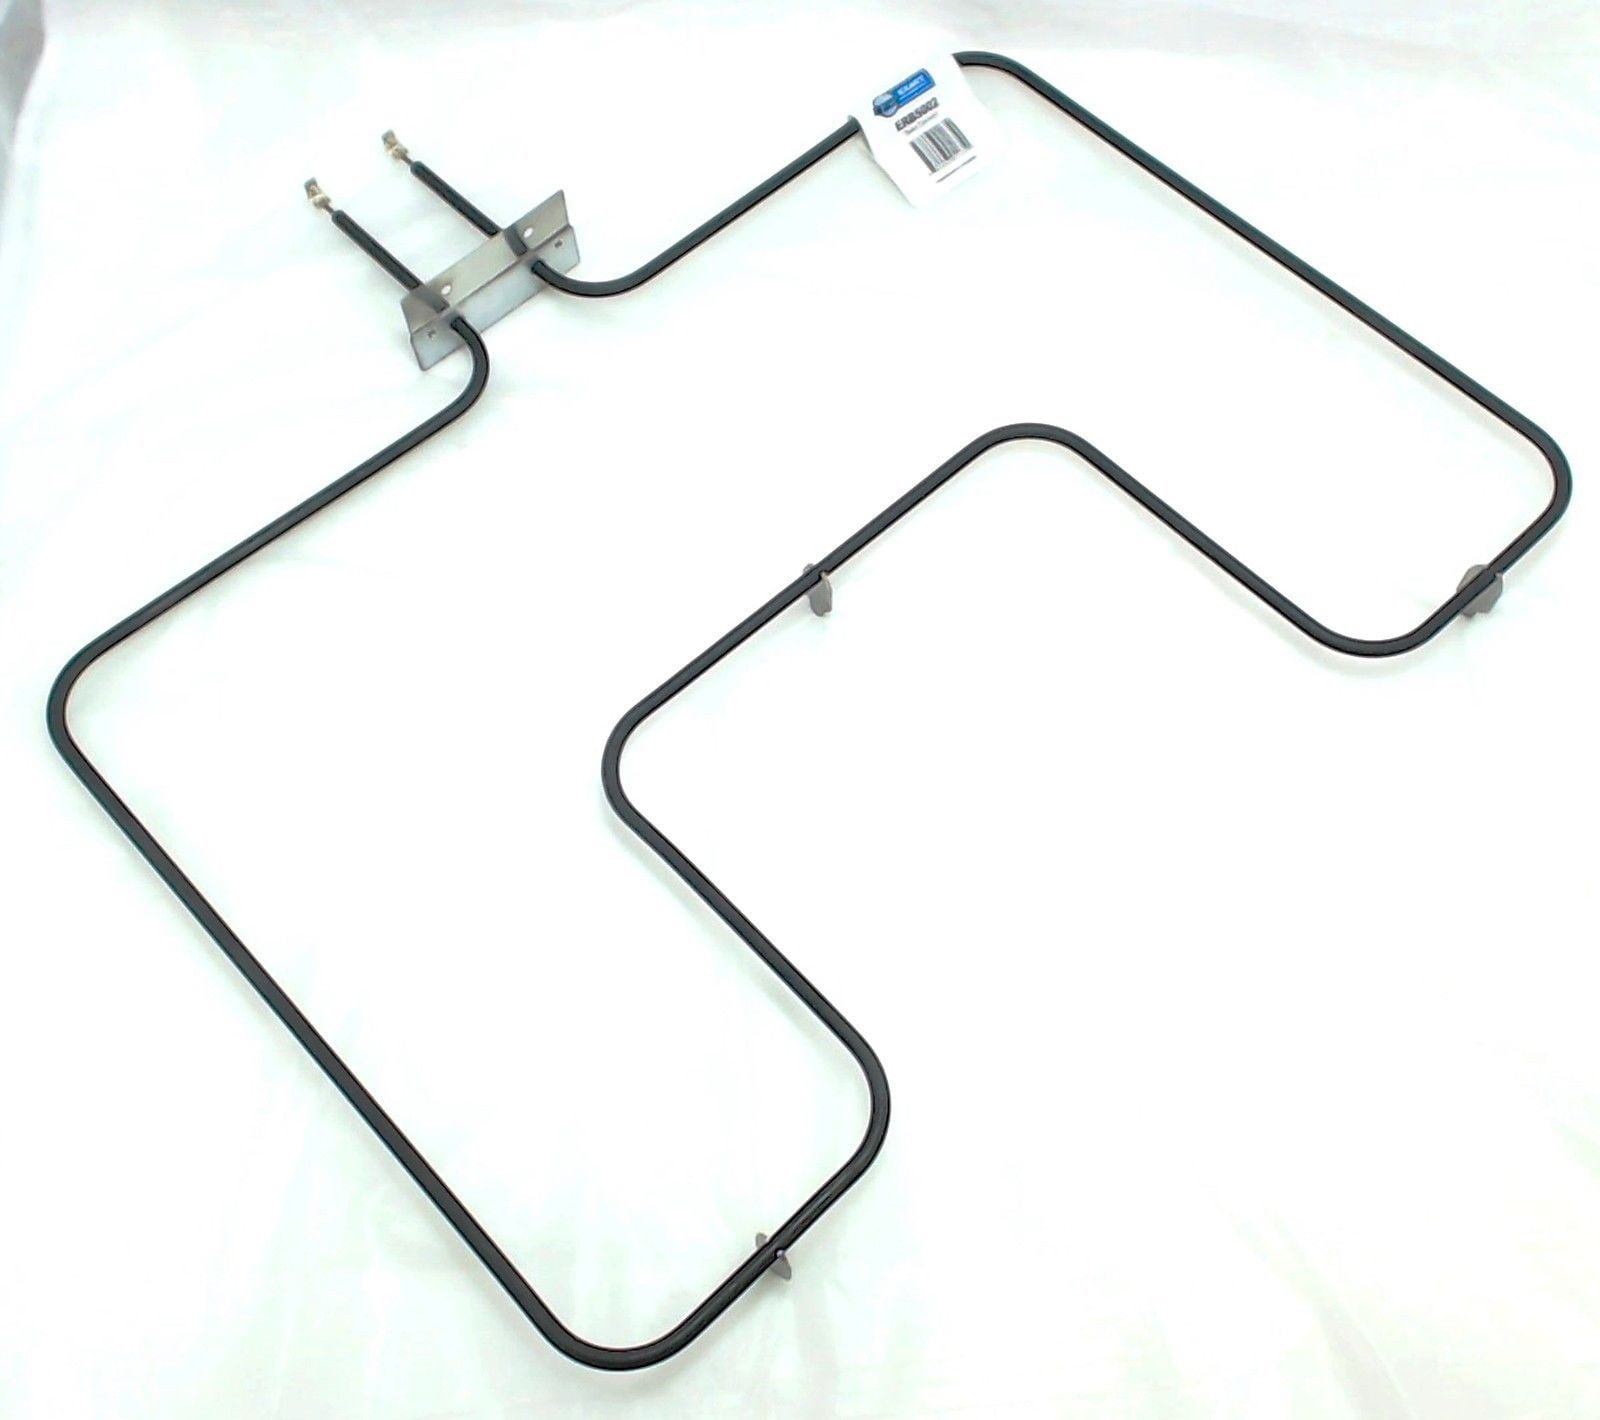 For Frigidaire Kenmore Oven Range Stove Bake Element # PM-PS977844 